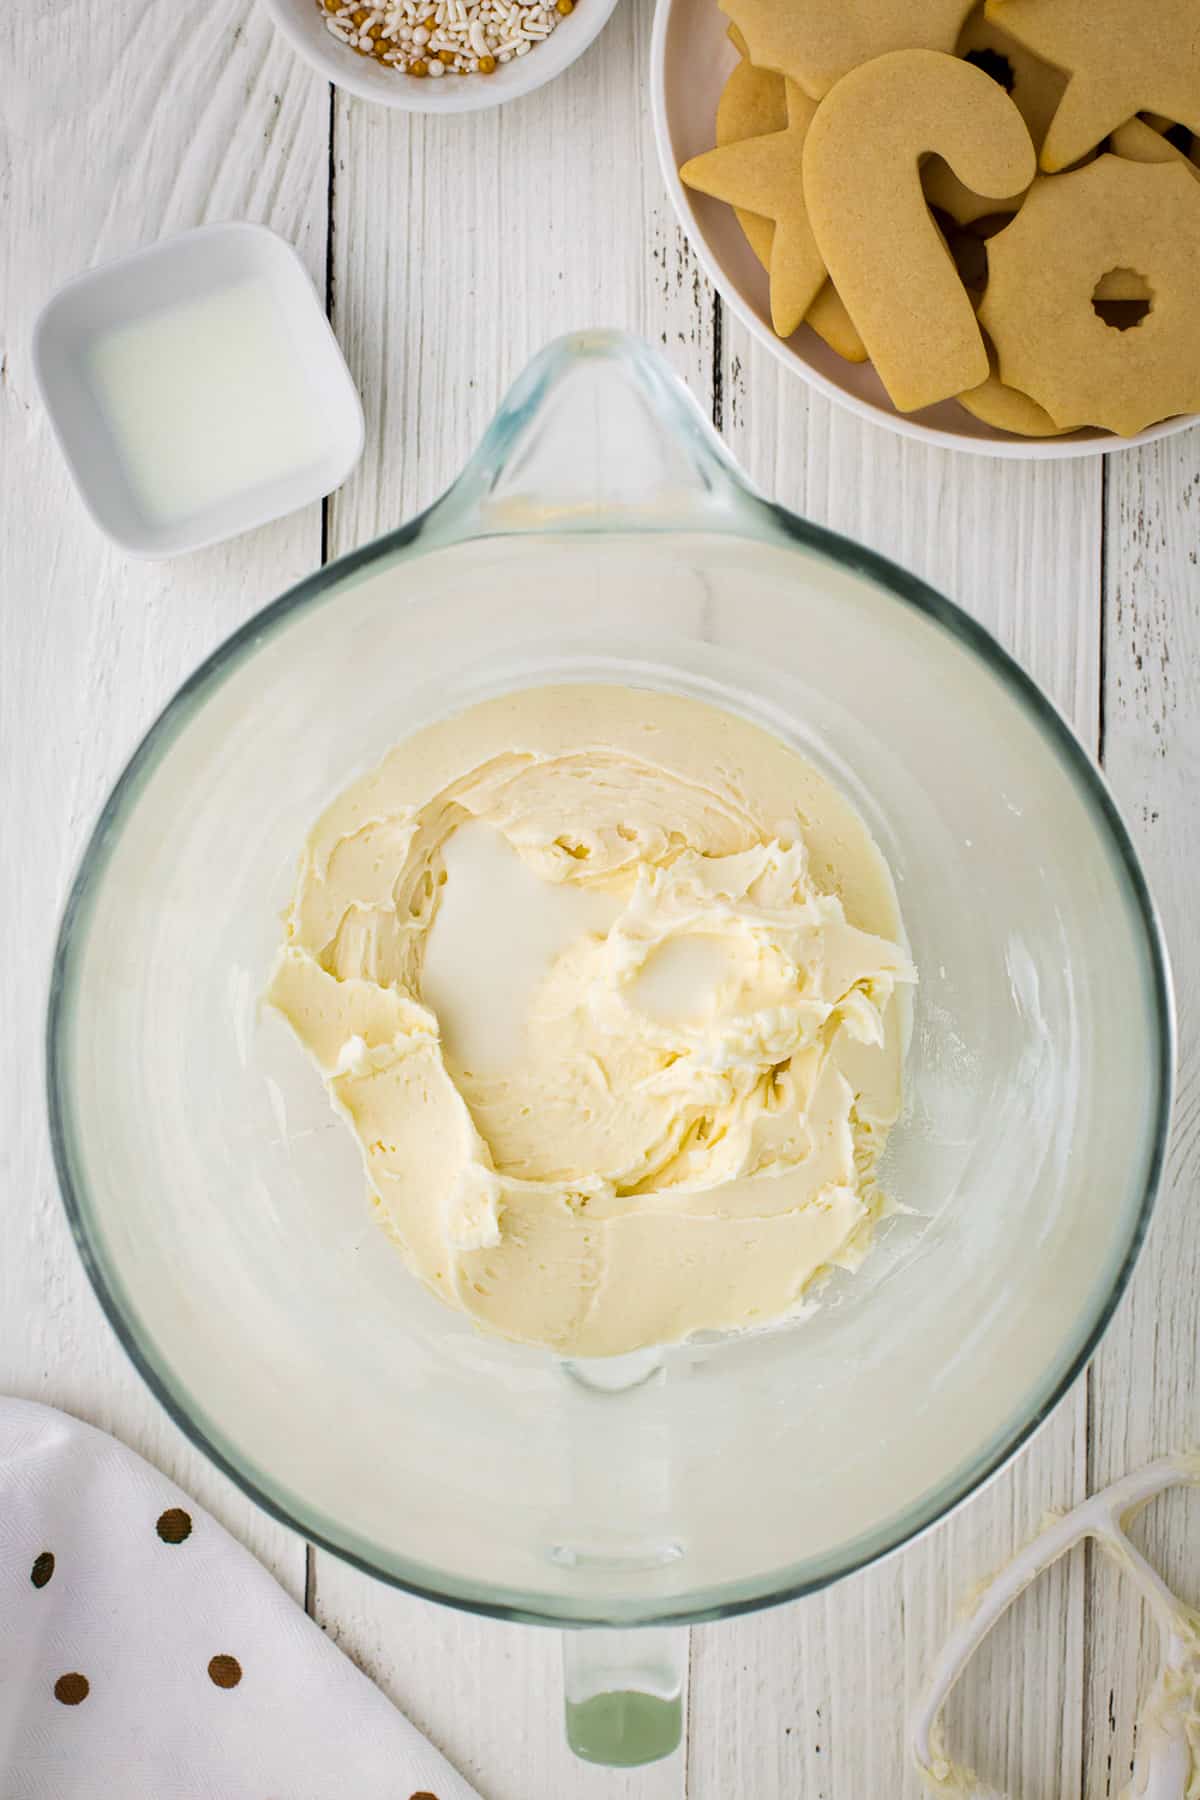 Butter whipped in a large glass bowl.